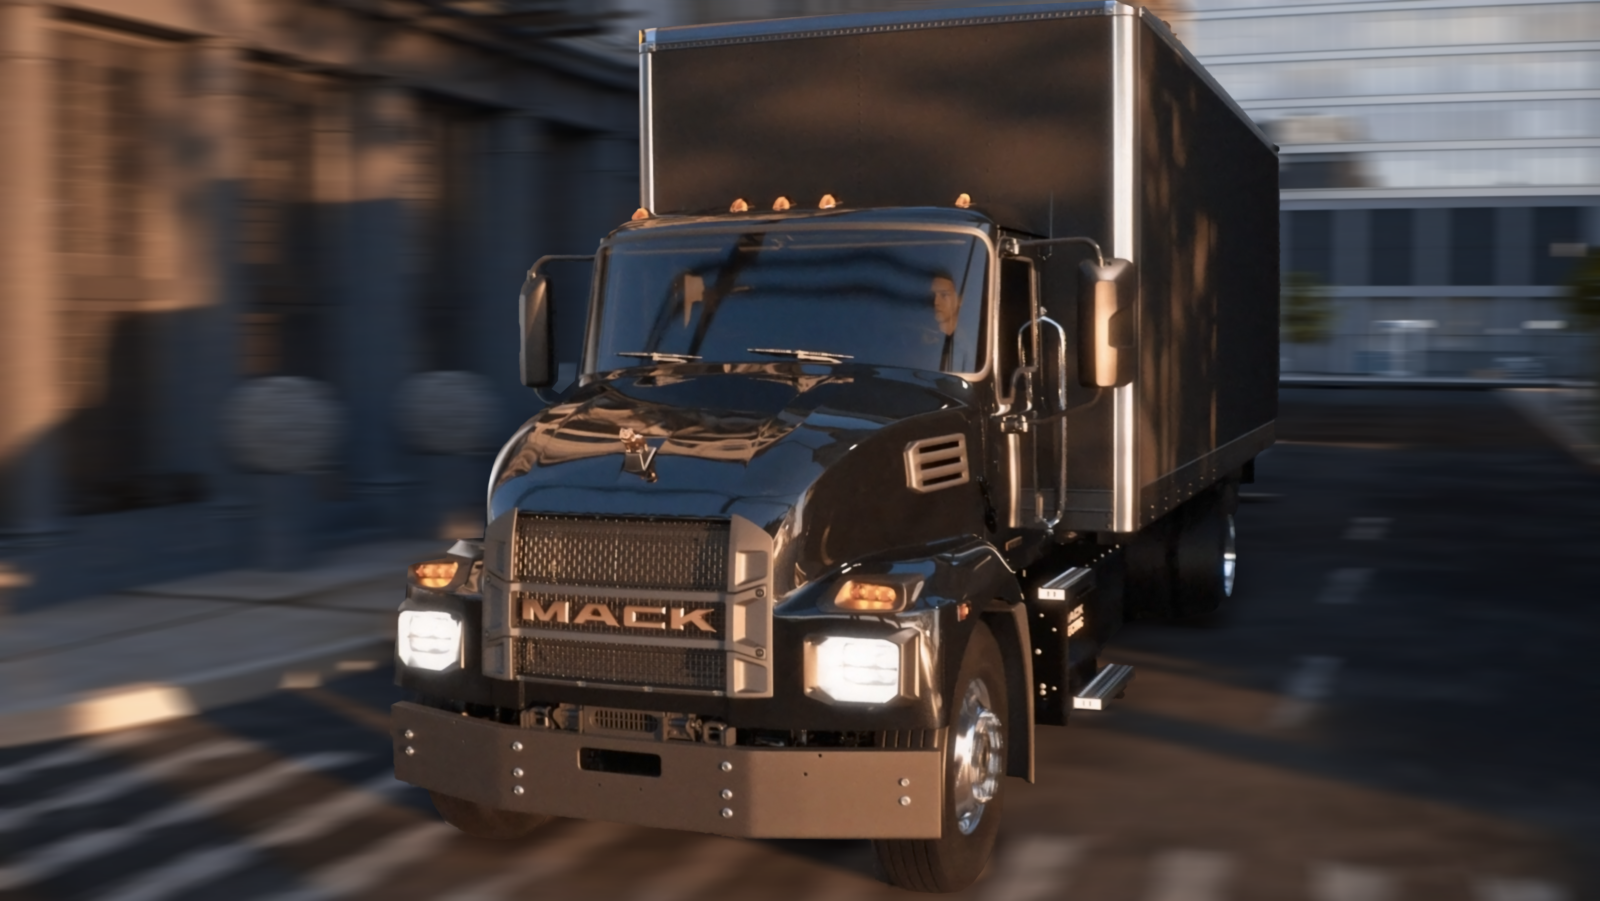 NEW – Mack Medium Duty Electric Decommissioning and Commissioning Certification